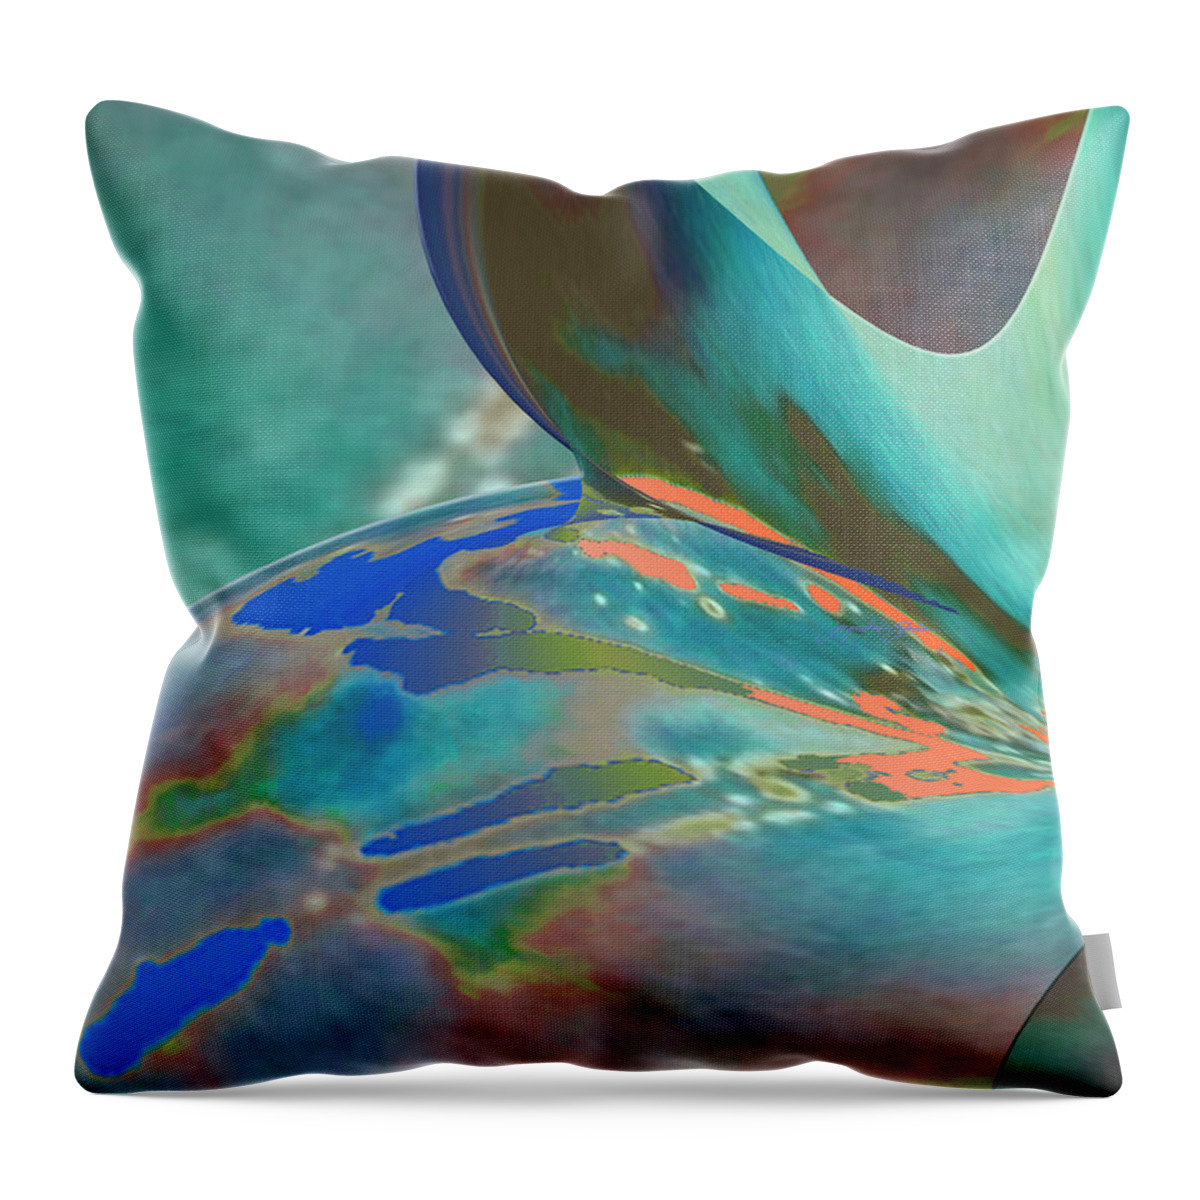 Abstract Throw Pillow featuring the digital art Roll Out by Jacqueline Shuler